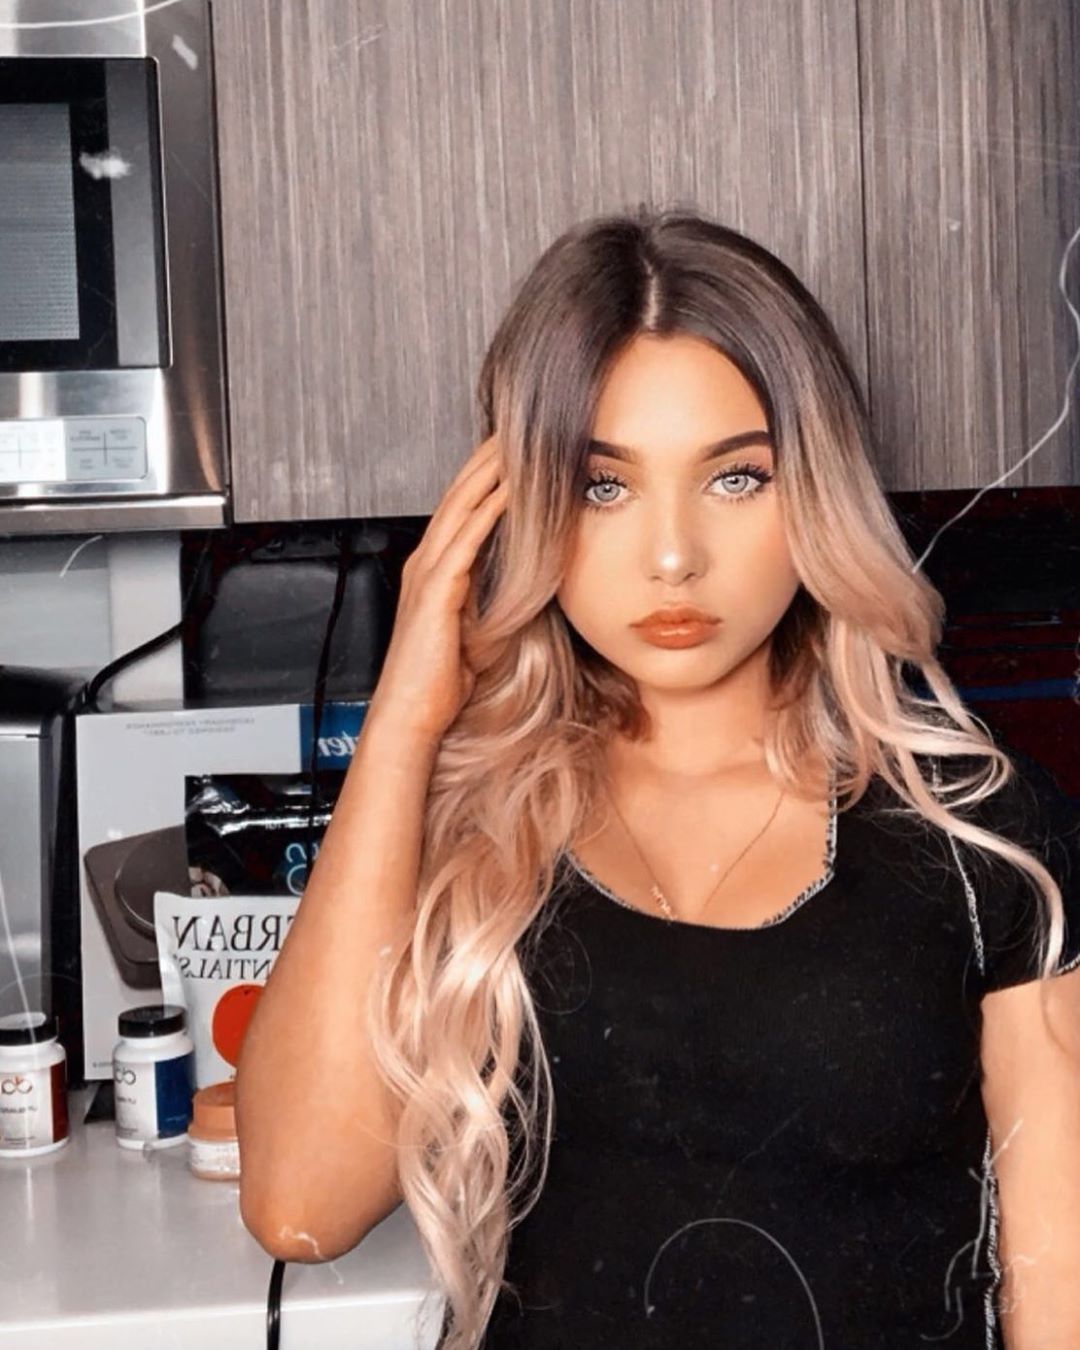 Alabama Barker Age, Biography, Height, Net Worth, Family & Facts